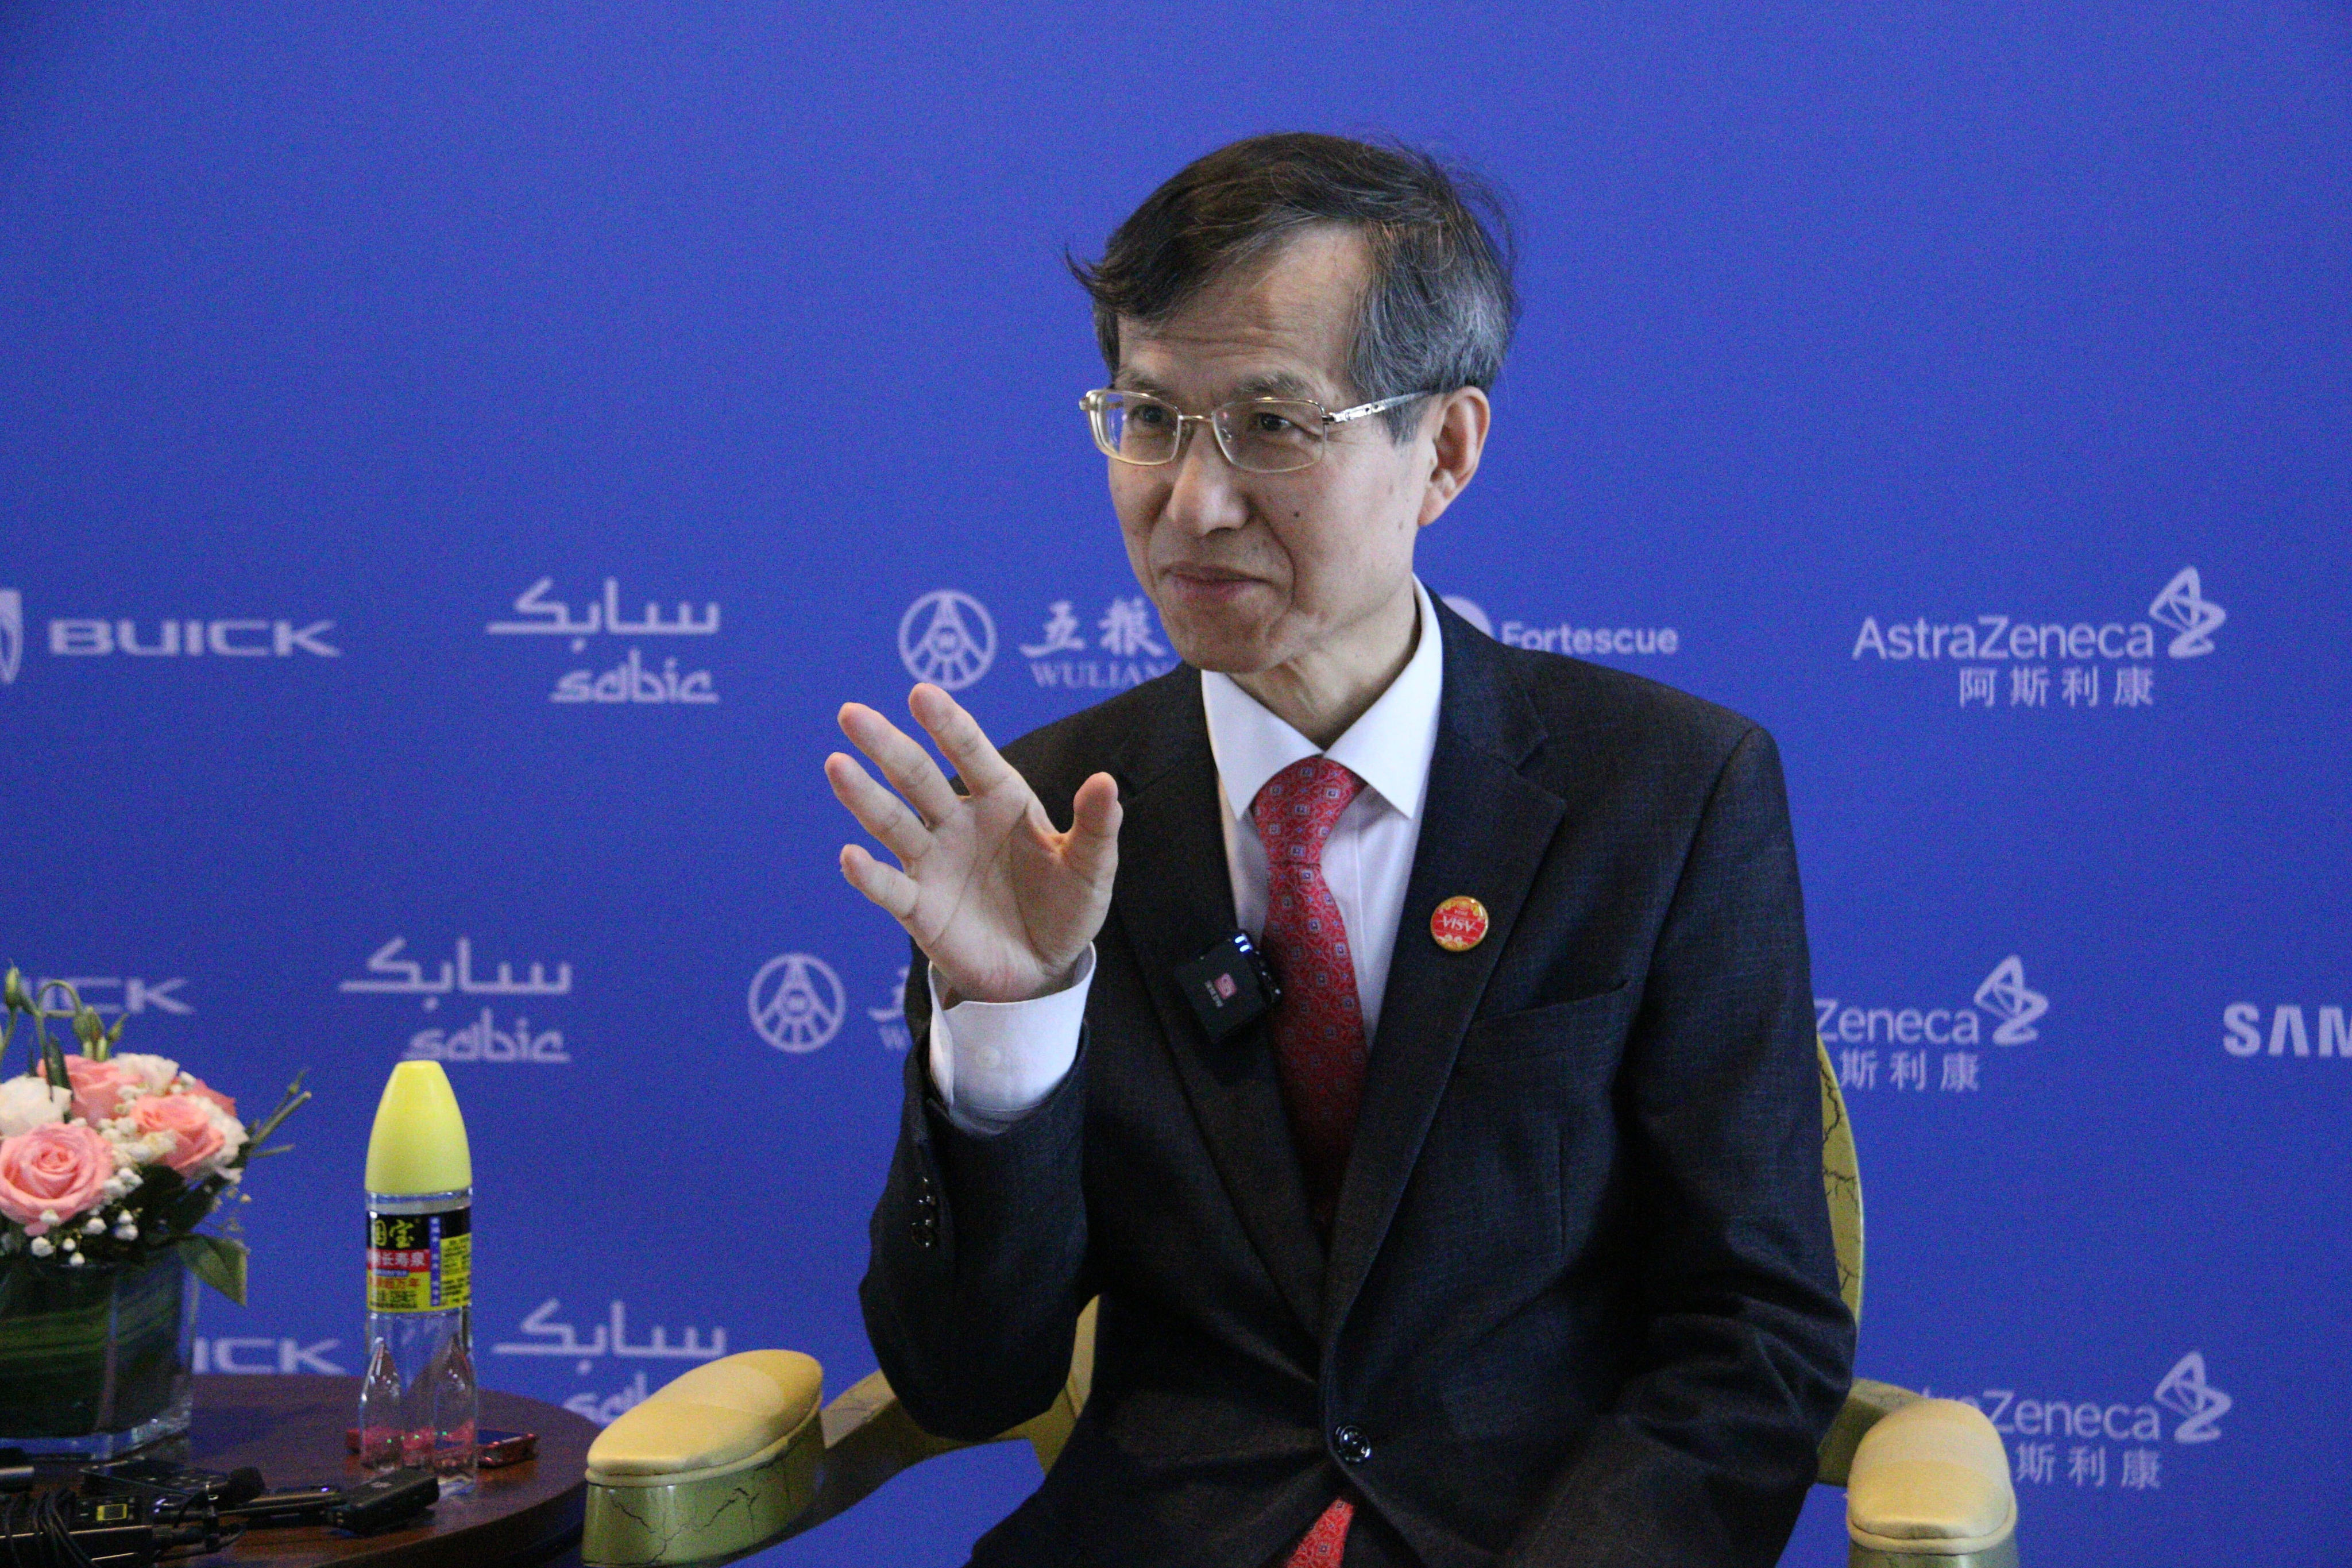 Speaking to reporters on Wednesday at the annual Boao Forum for Asia in Hainan, China, Lee Hee-sup, the head of the Trilateral Cooperation Secretariat, said he hoped for a leaders’ summit “in the near future”. Photo: China Review News Agency